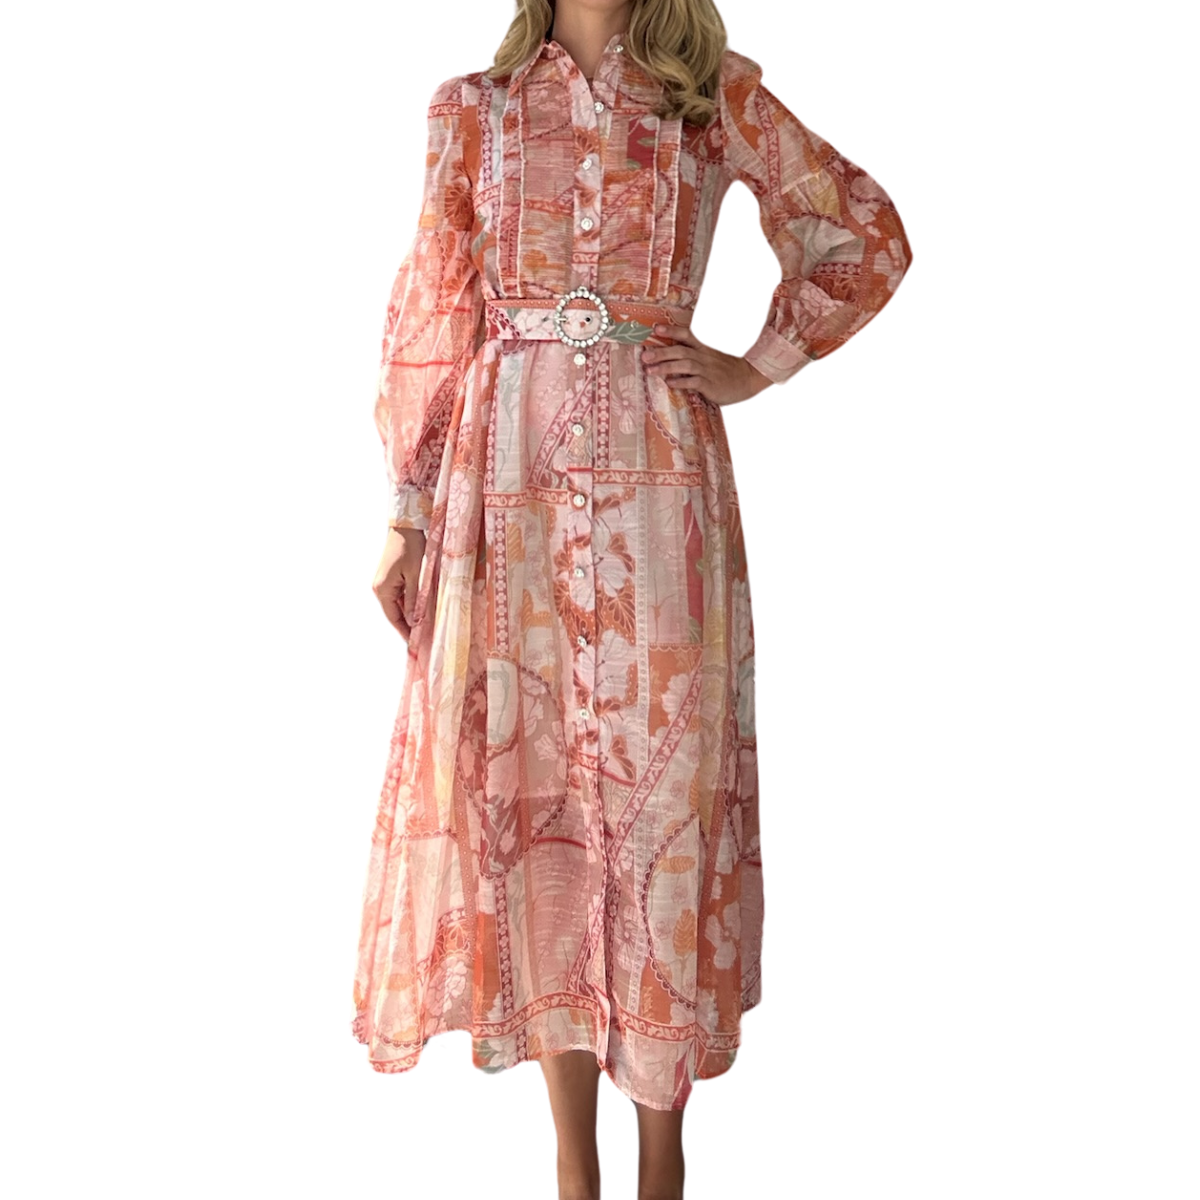 Belted Long Sleeve Dress in Coral Print